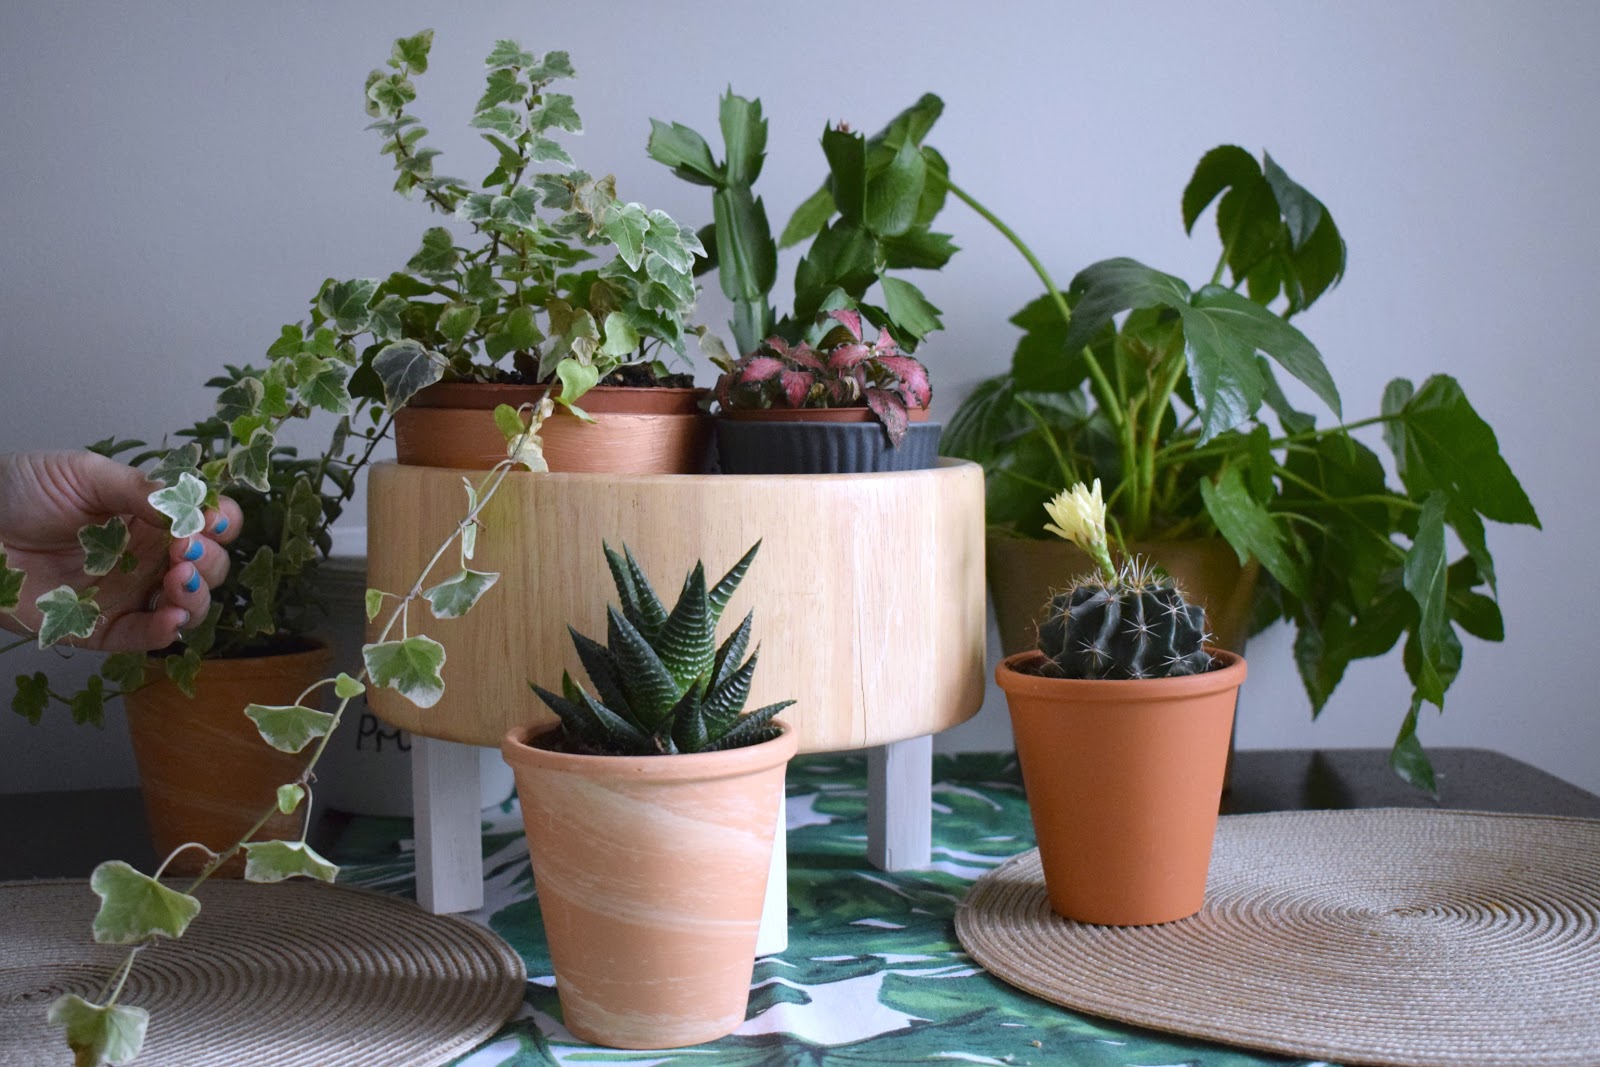 DIY How to make a simple plant pot stand